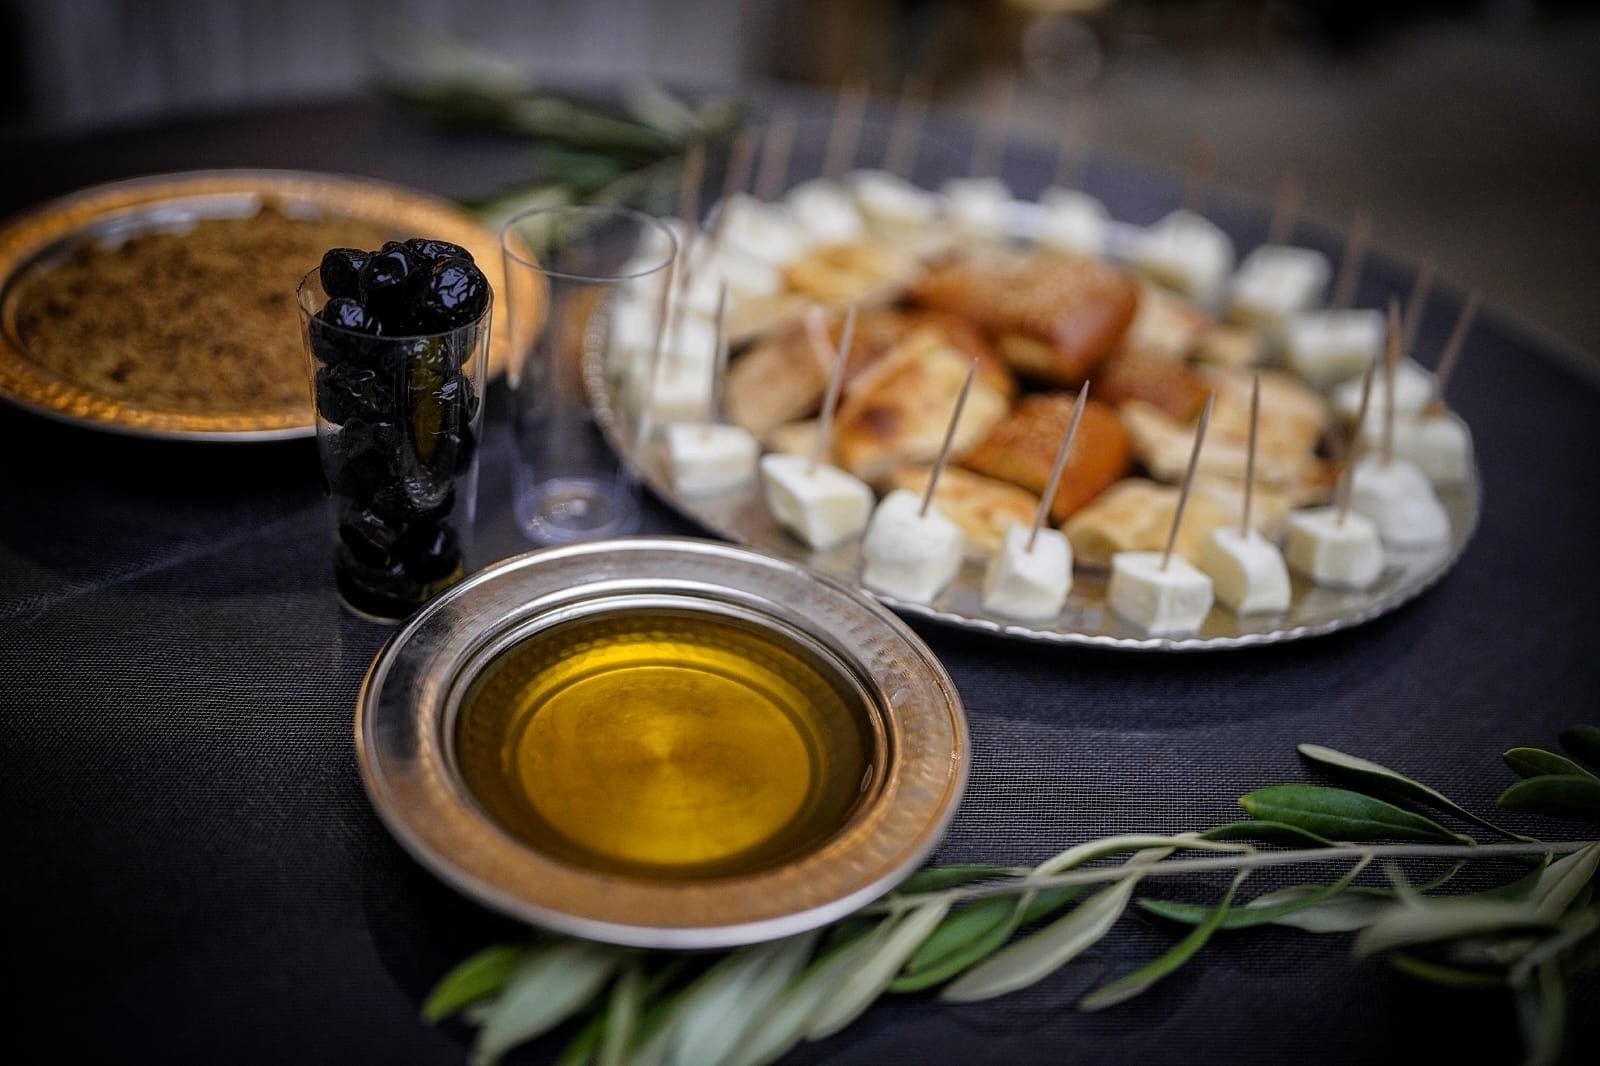 Olive oil and other local products displayed at "Kilis Cuisine from Oylum Höyük (mound) to the Present" event, Istanbul, Turkey, May 27, 2022. (Photo courtesy of Uğur Yıldırım)